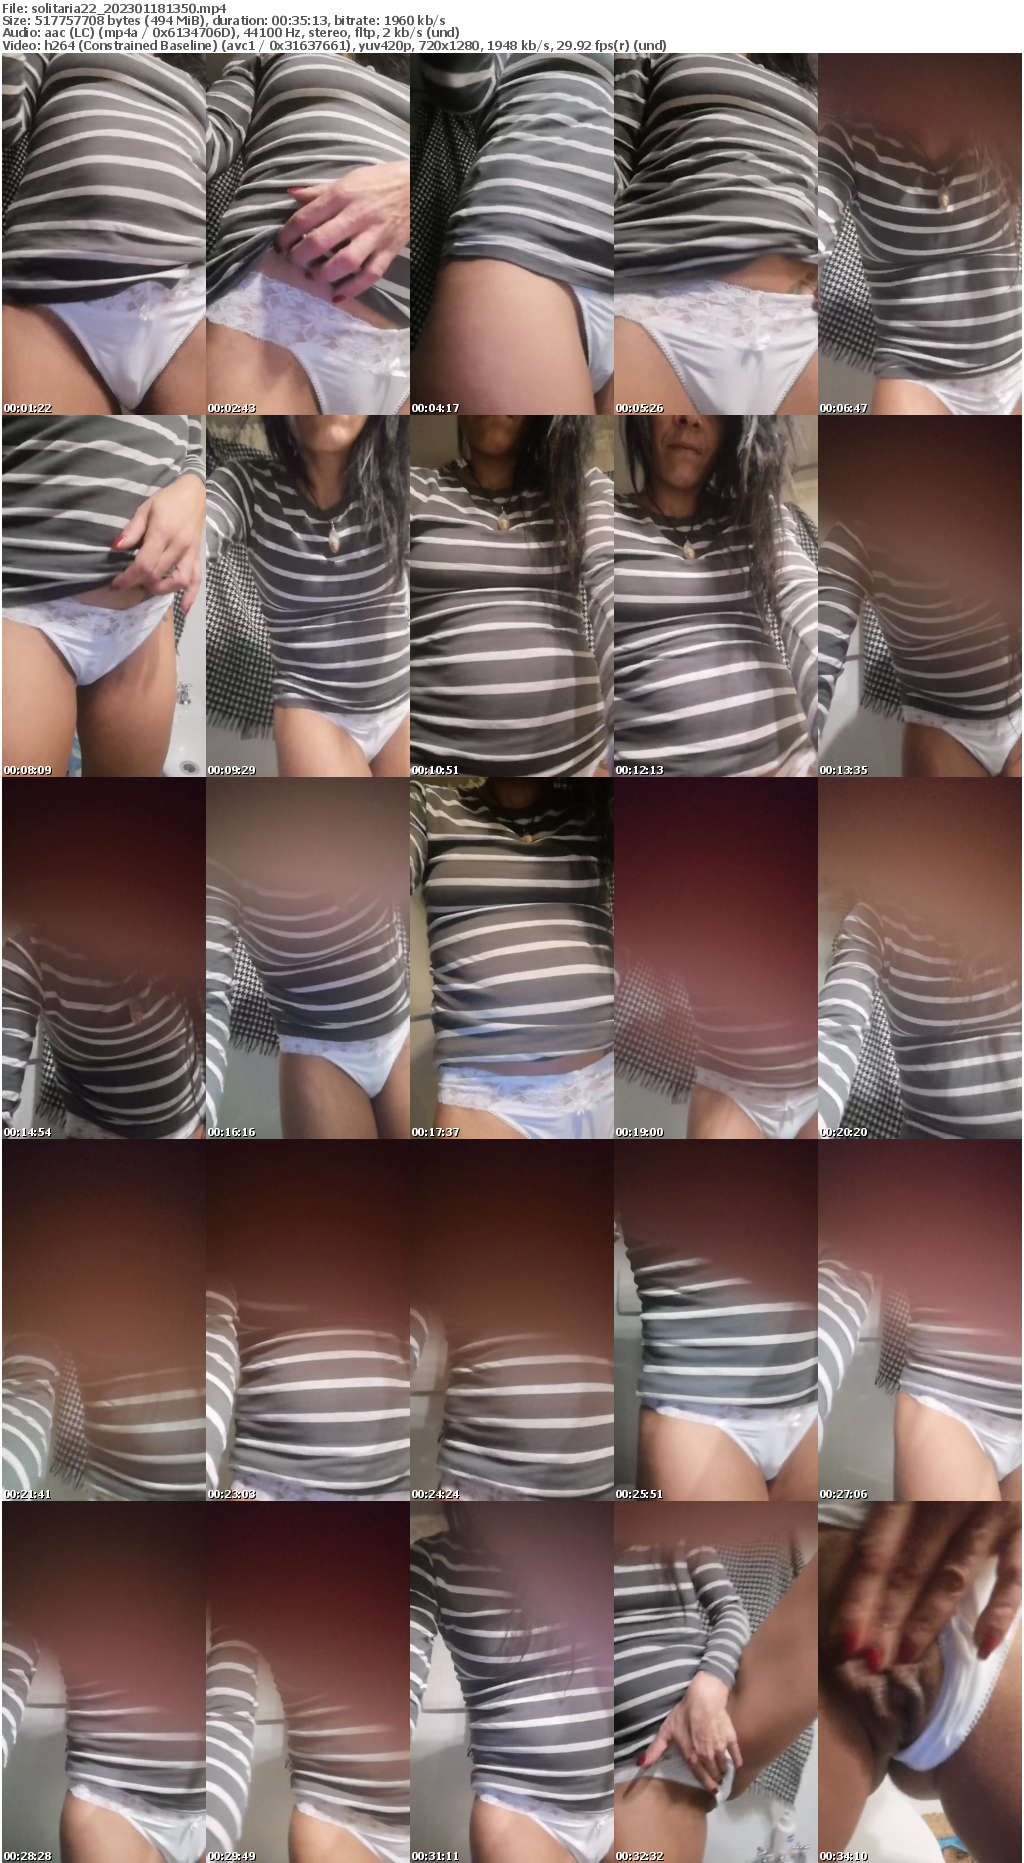 Preview thumb from solitaria22 on 2023-01-18 @ cam4